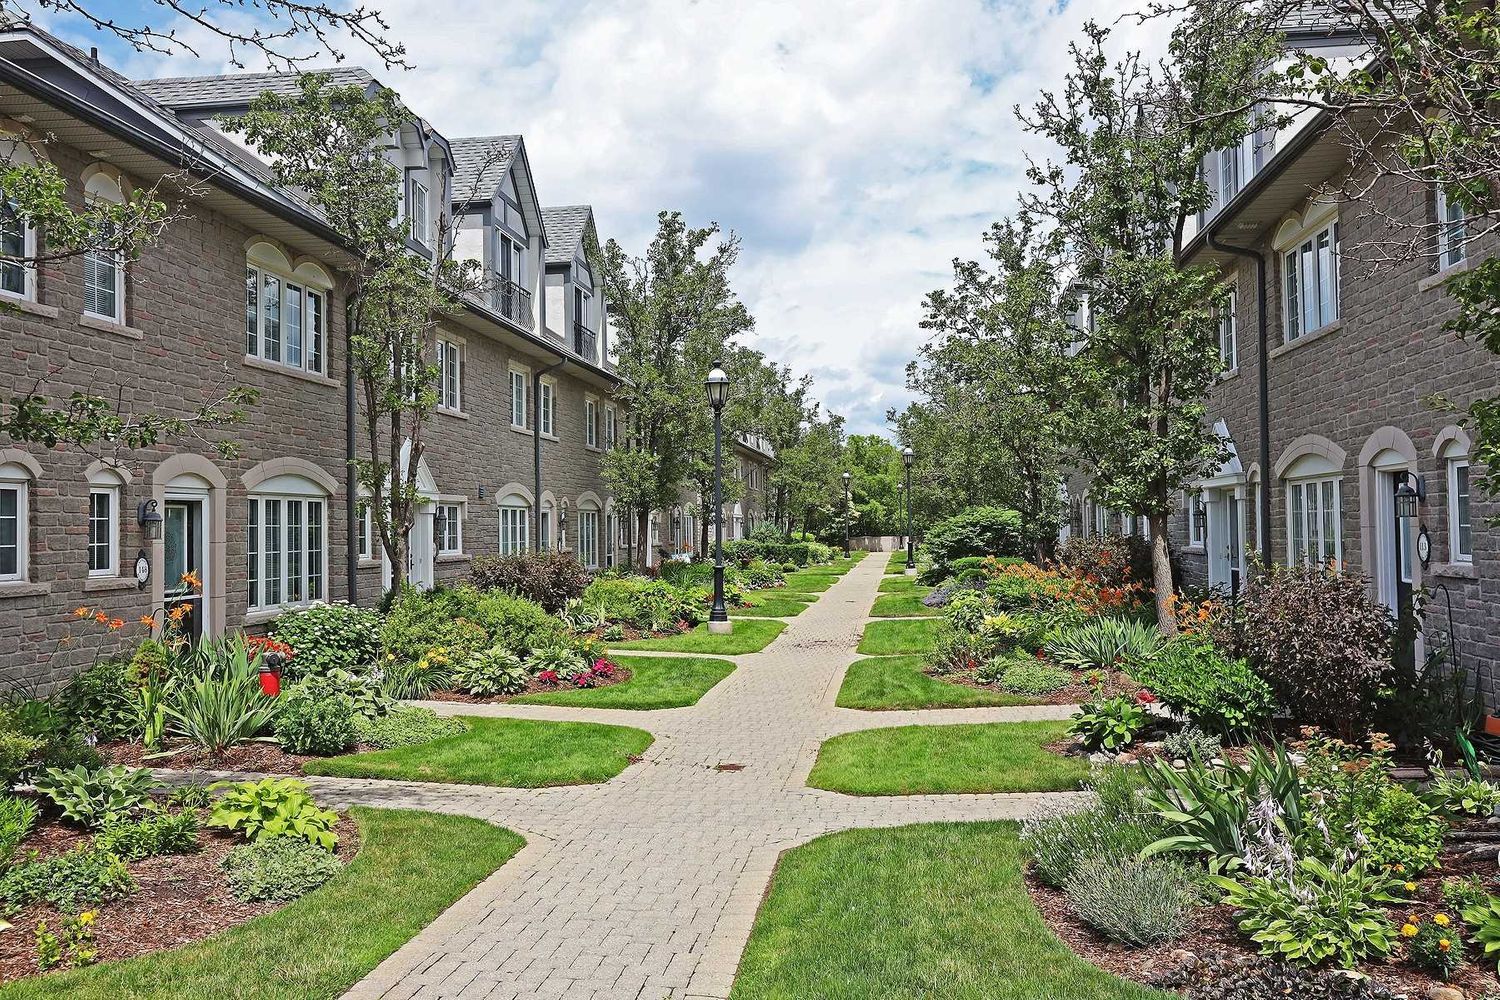 1995 Royal Road. Chateaux Townhomes is located in  Pickering, Toronto - image #2 of 2